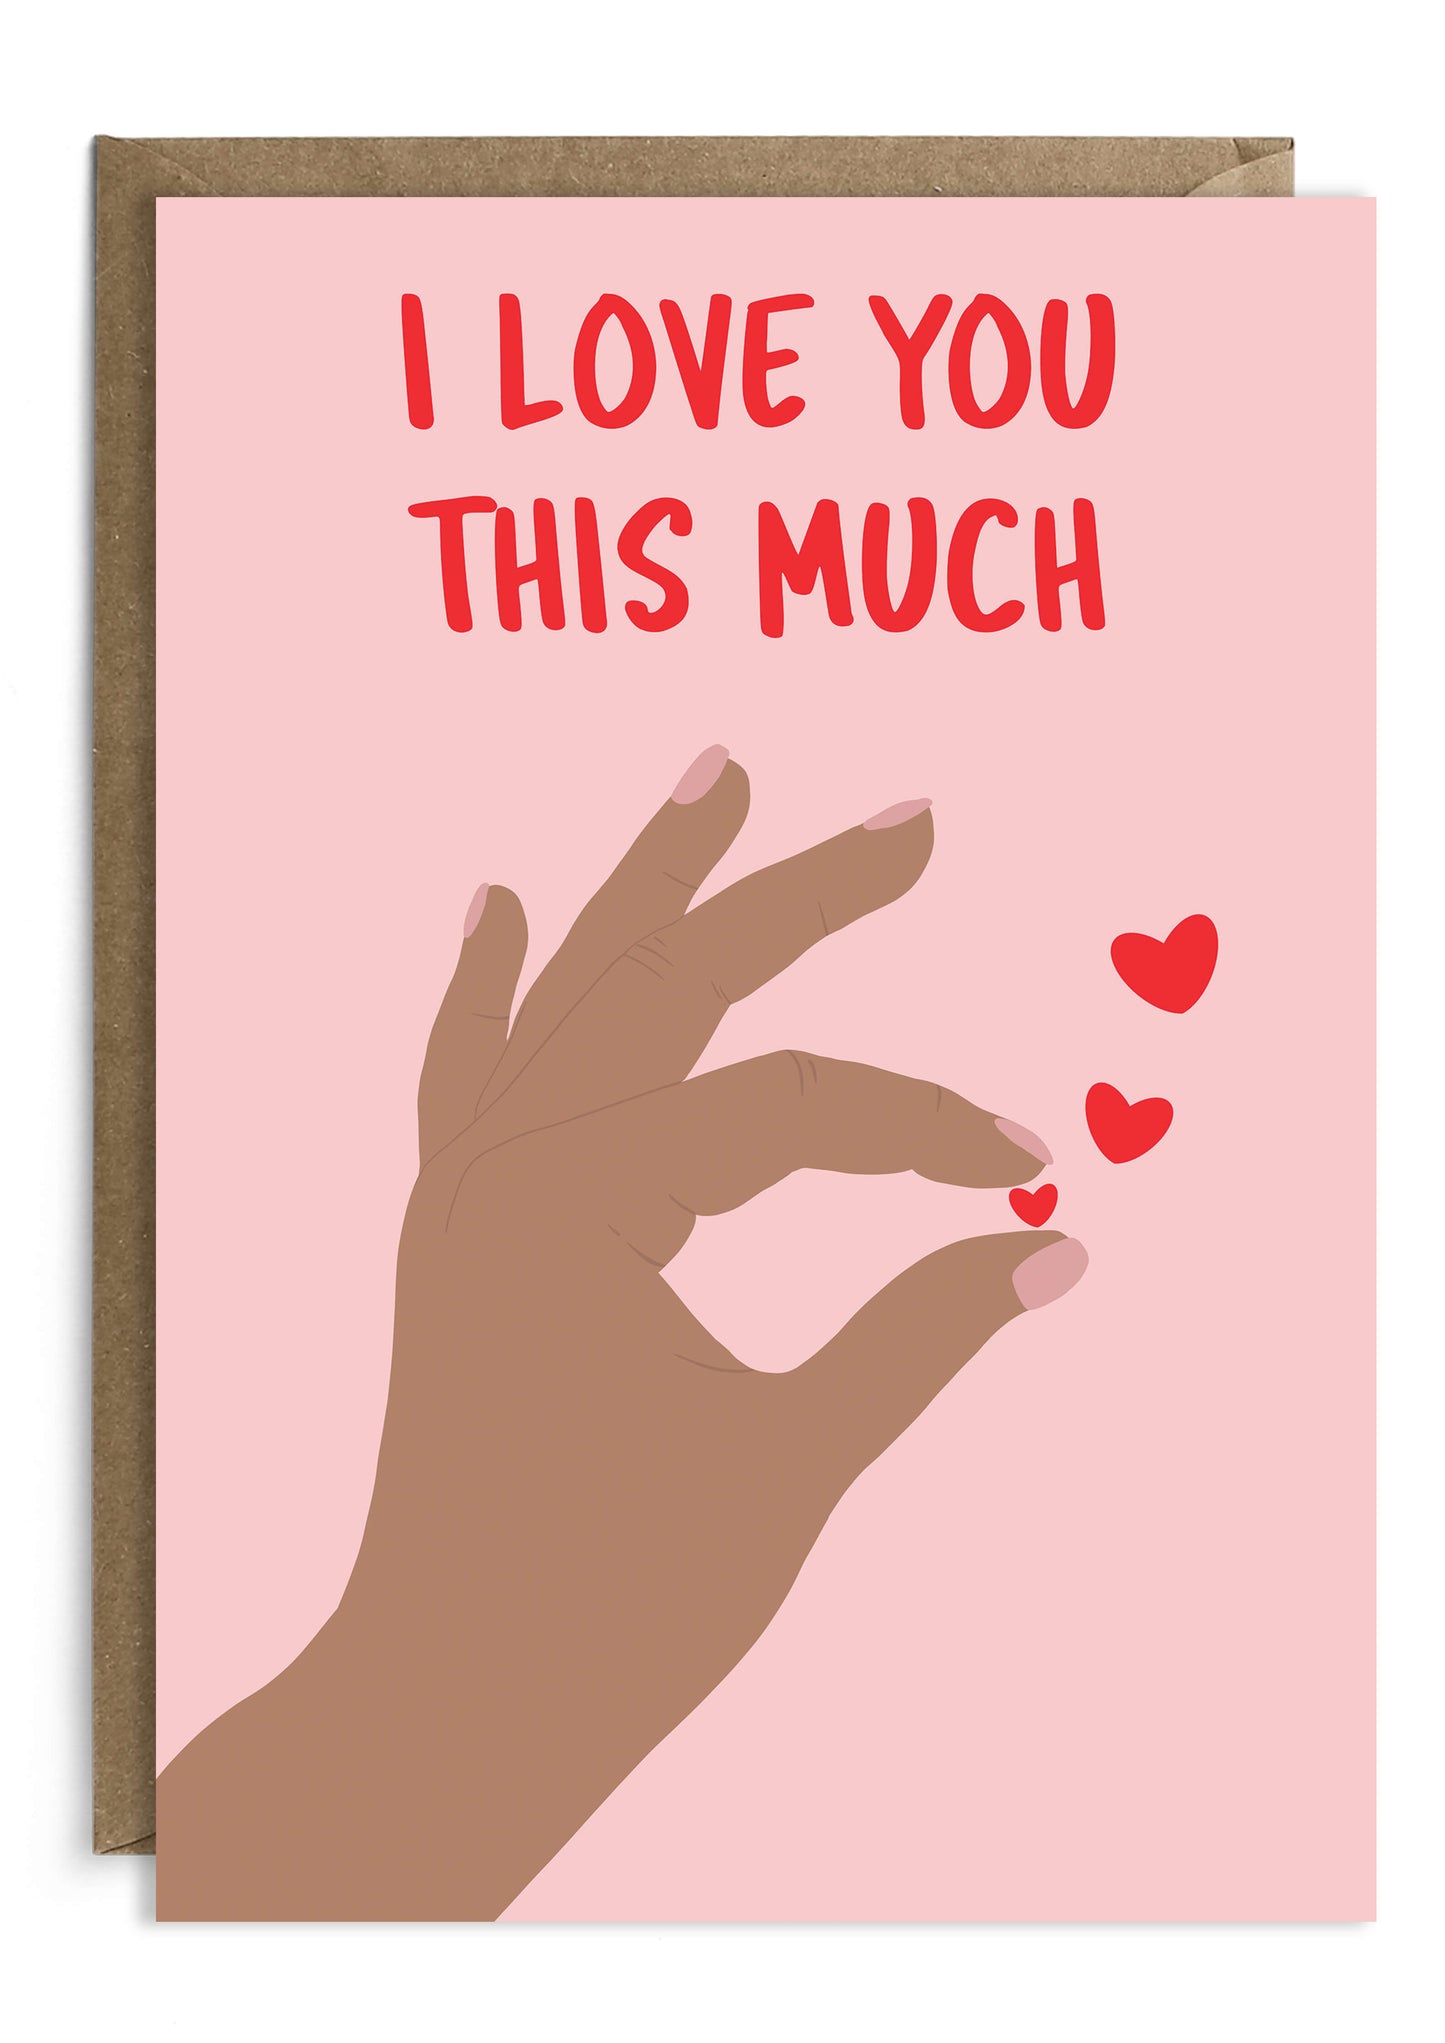 Love You This Much - Funny Love Card